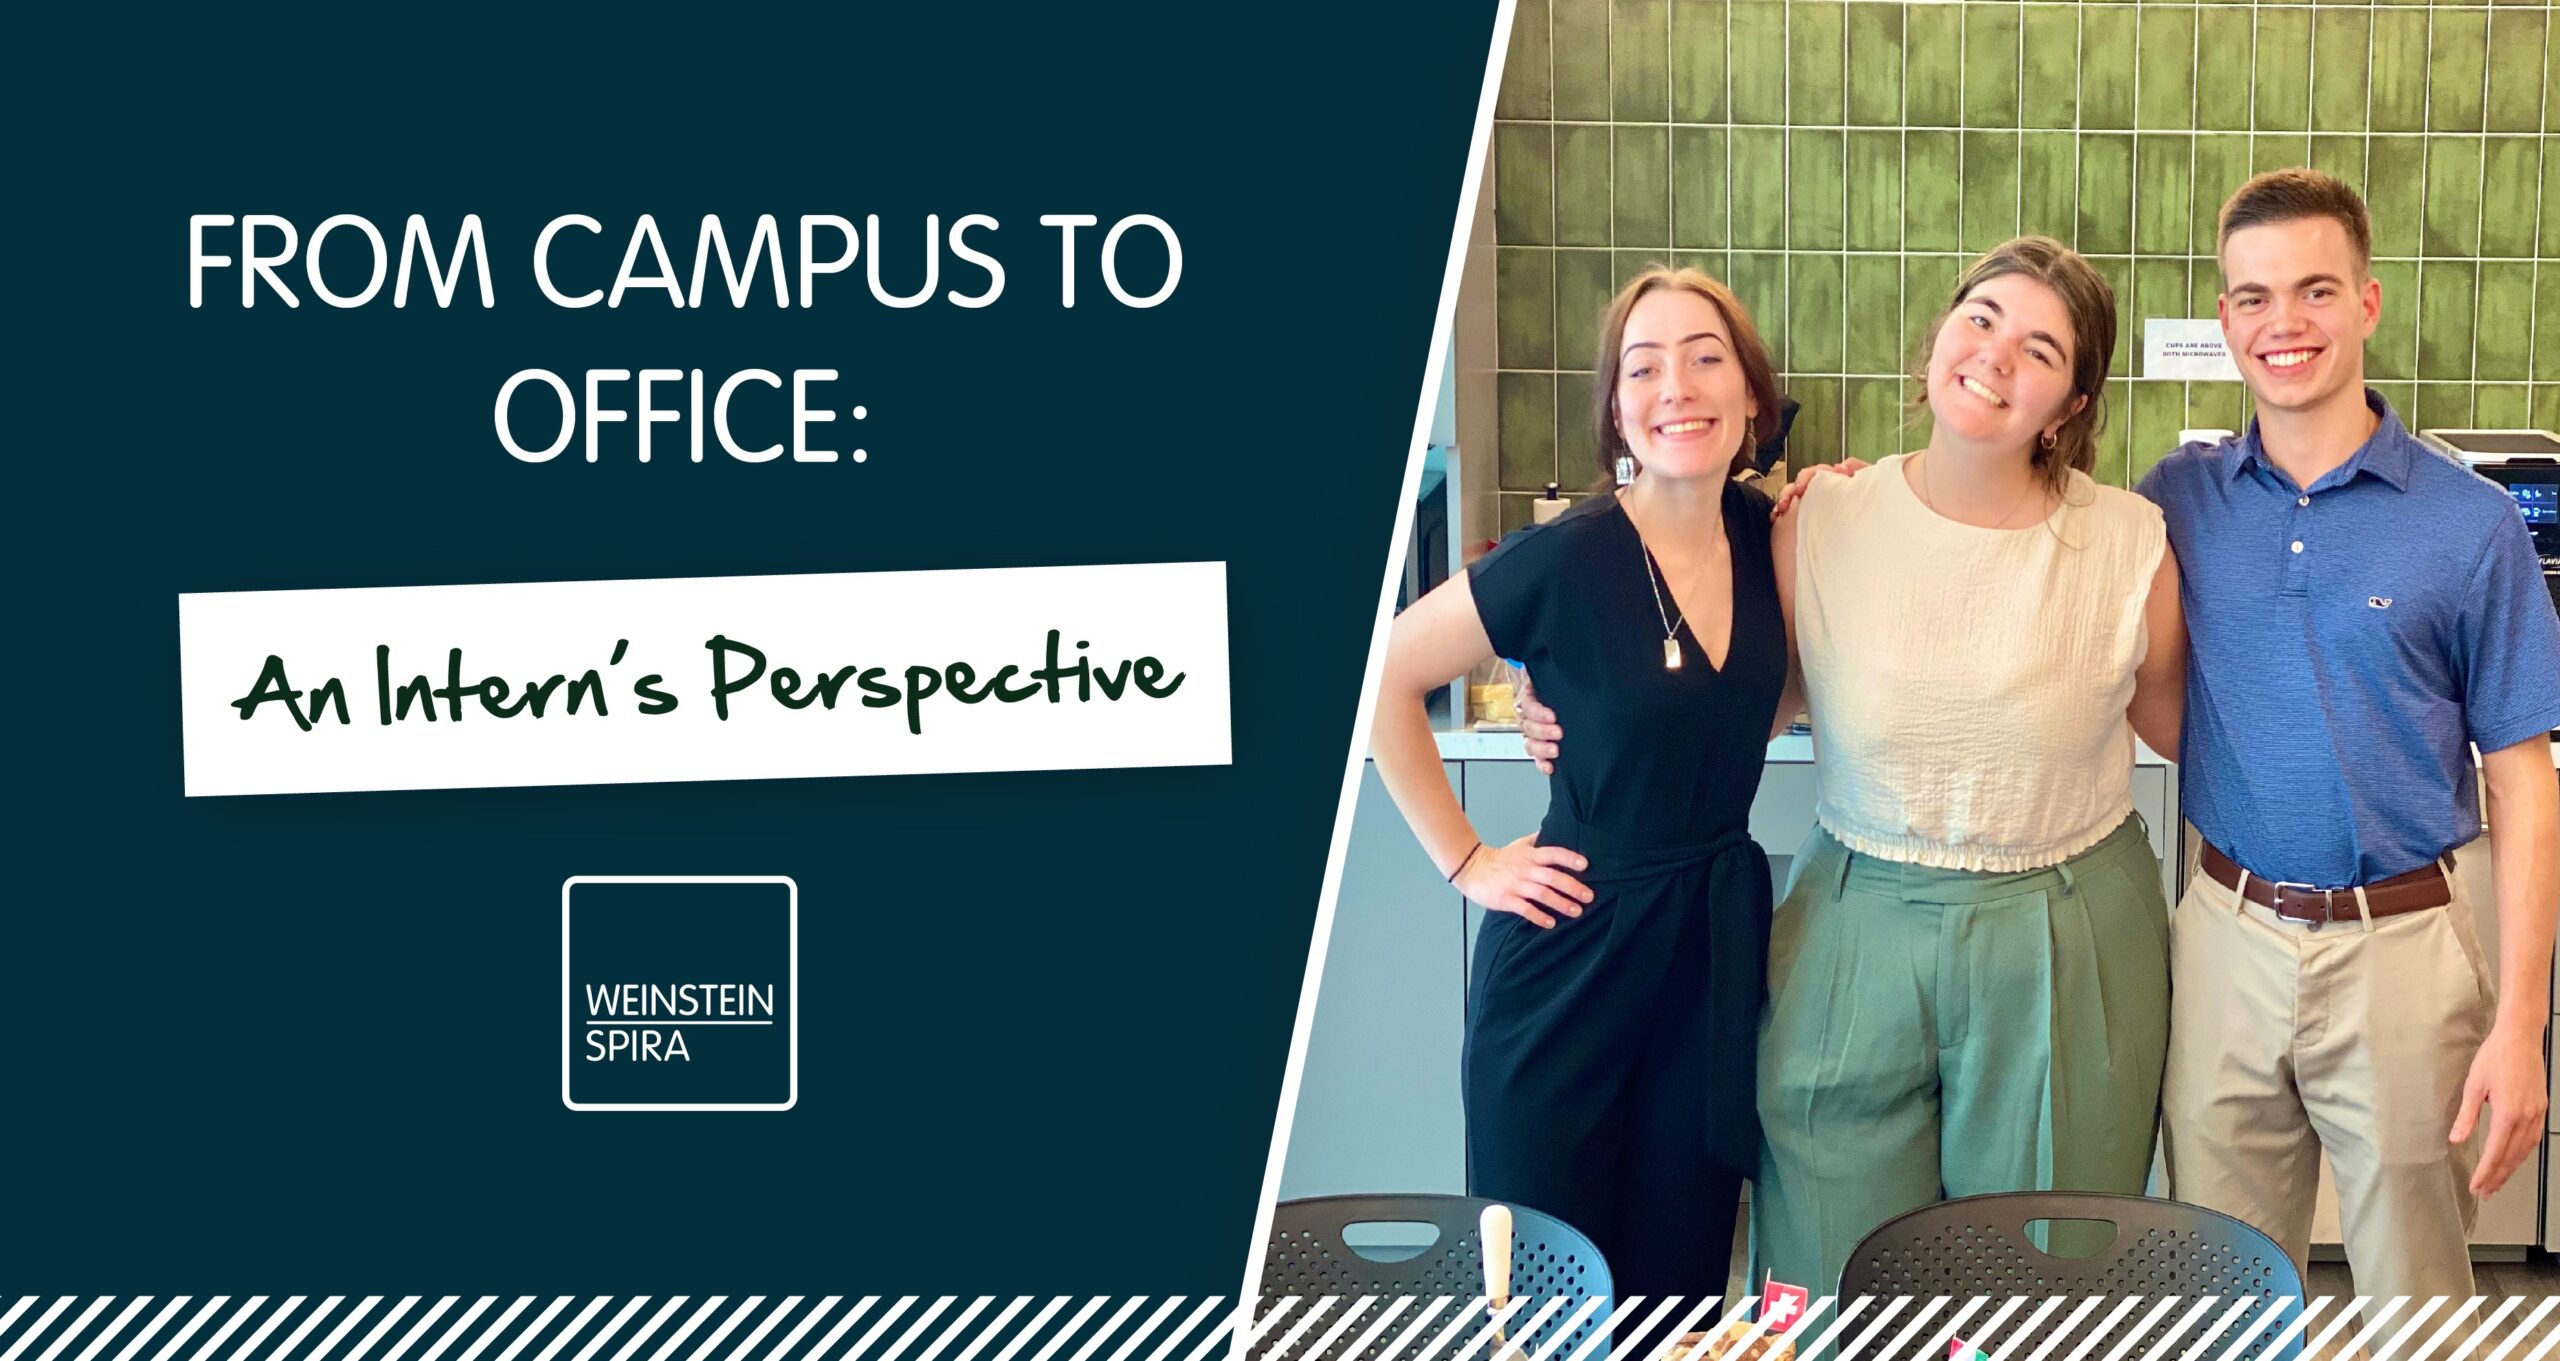 From Campus to Office: An Intern’s Perspective